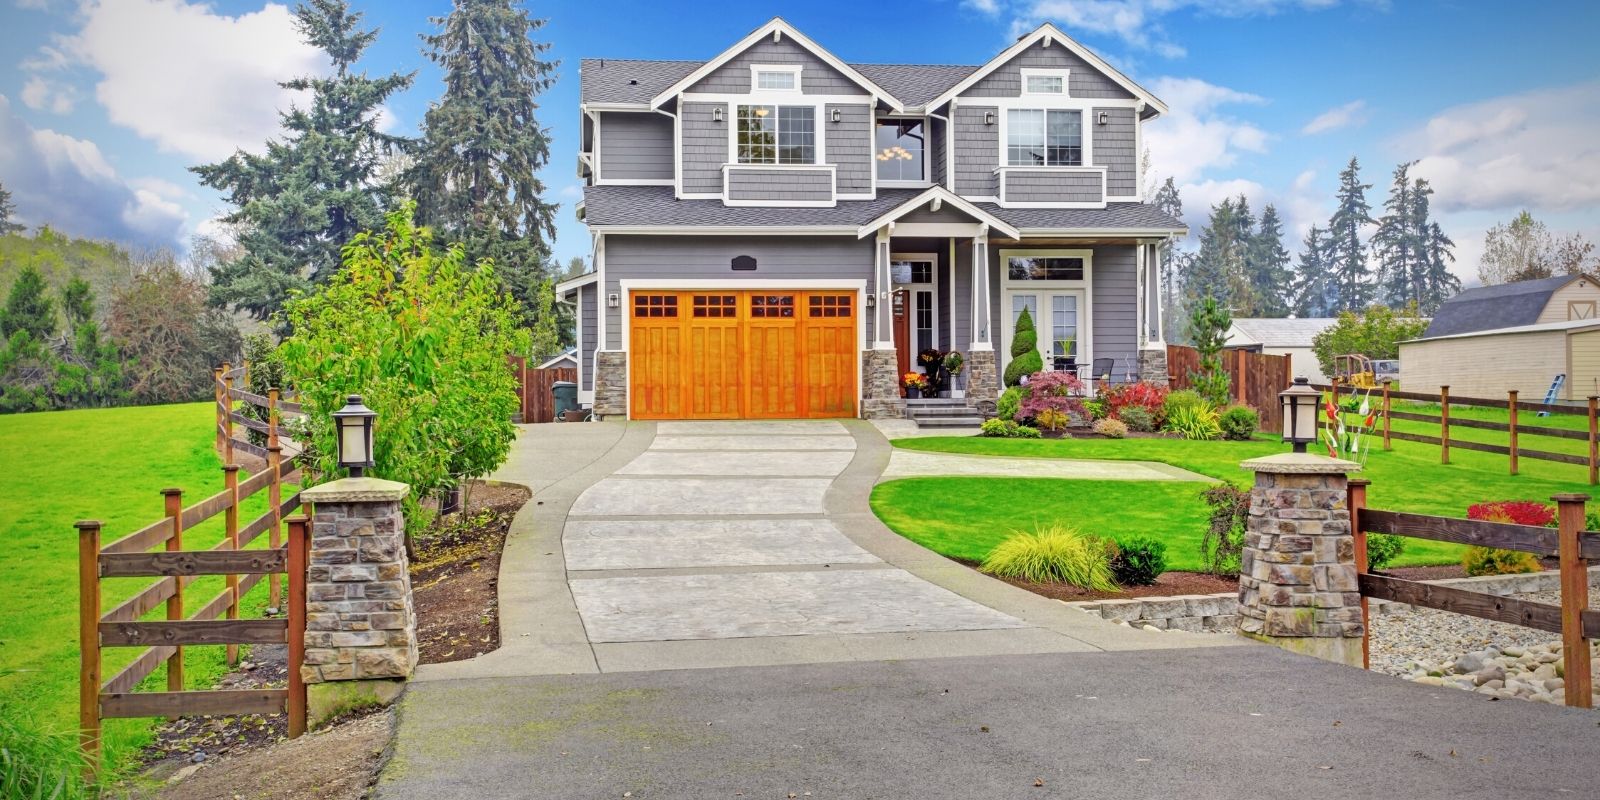 10 Essential Curb Appeal Tips for Selling Your Home